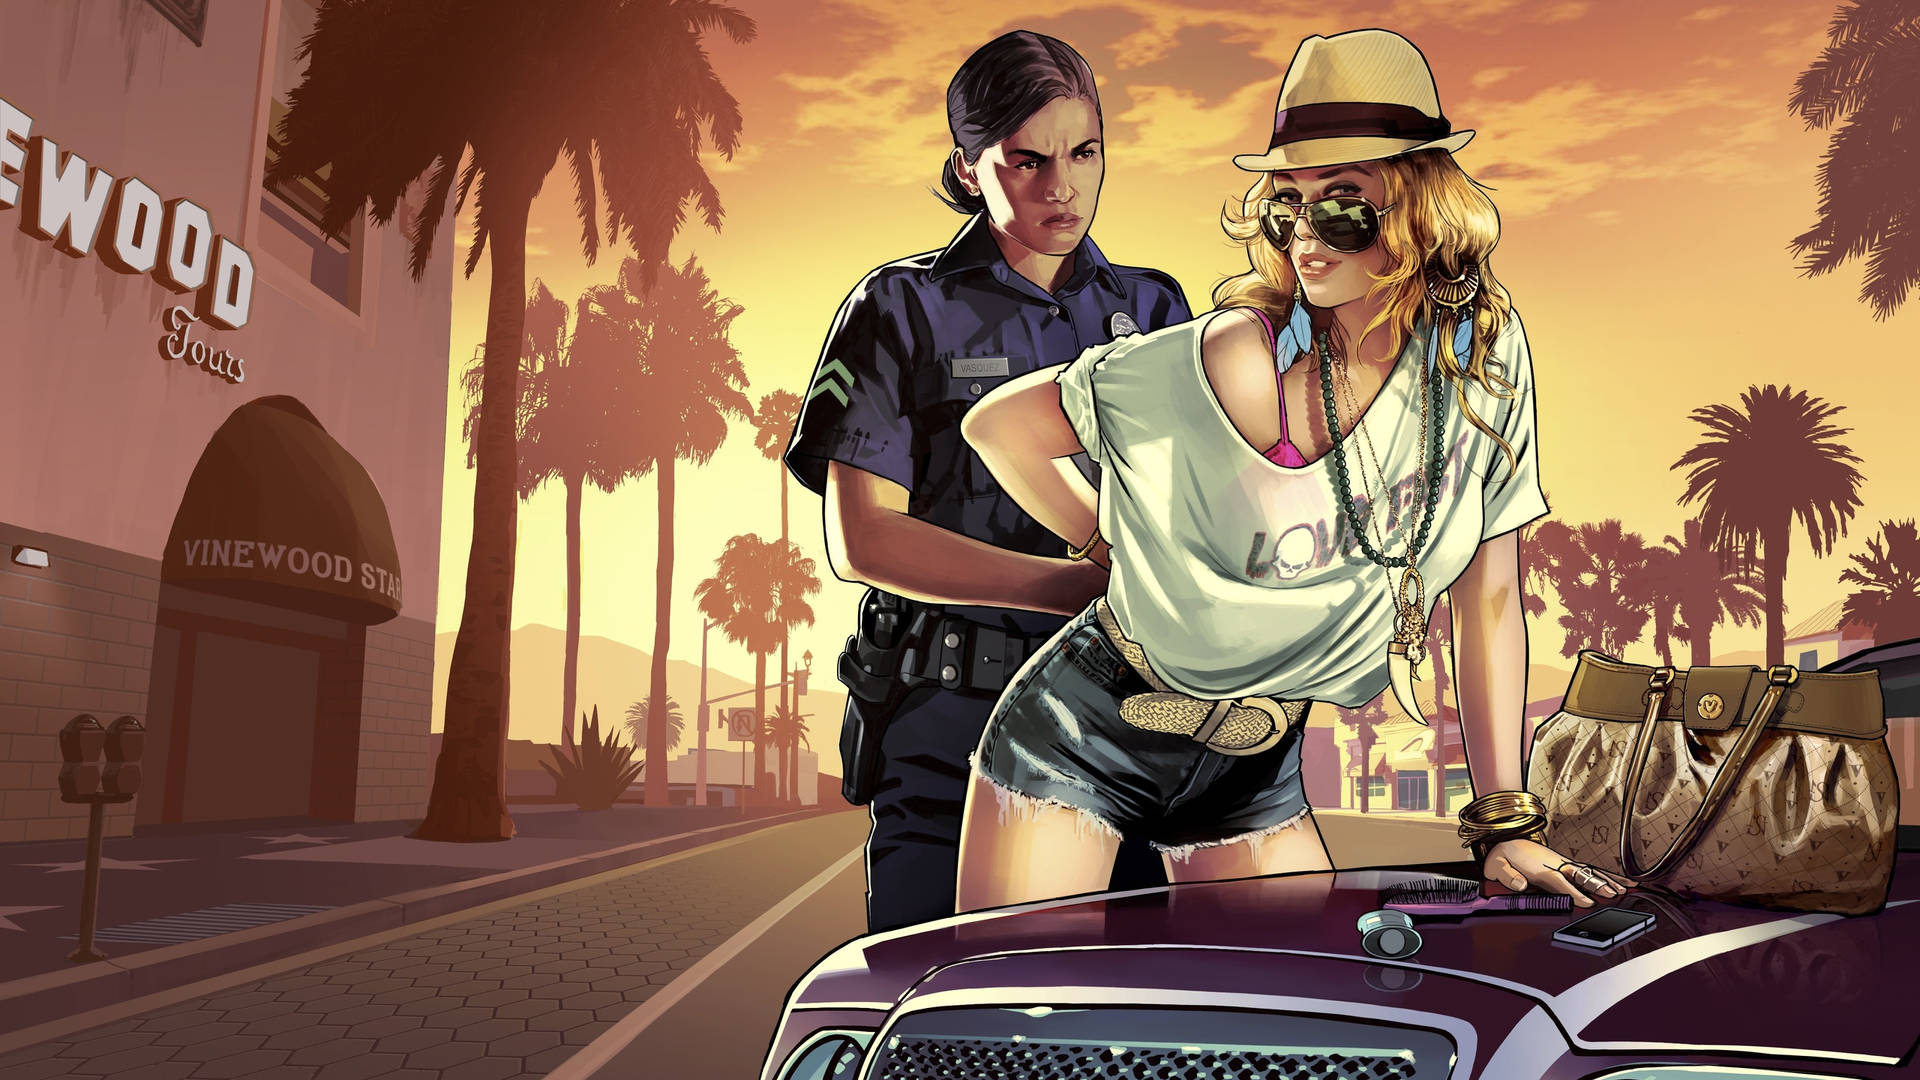 Gta 5 2560x1440 Policewoman Handcuffing Actress Background